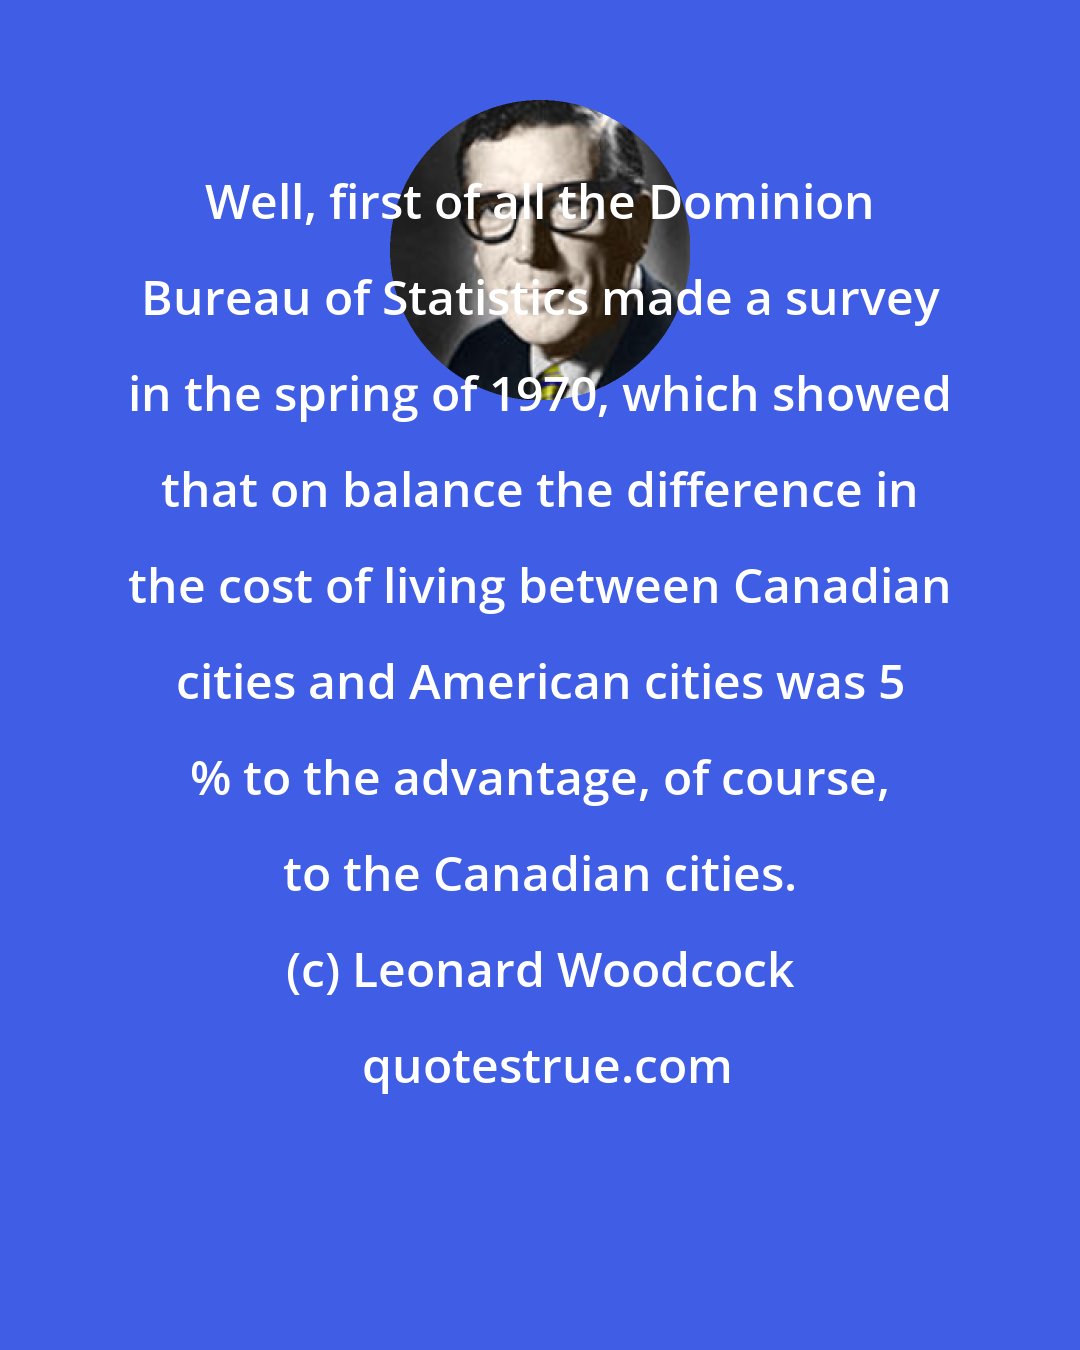 Leonard Woodcock: Well, first of all the Dominion Bureau of Statistics made a survey in the spring of 1970, which showed that on balance the difference in the cost of living between Canadian cities and American cities was 5 % to the advantage, of course, to the Canadian cities.